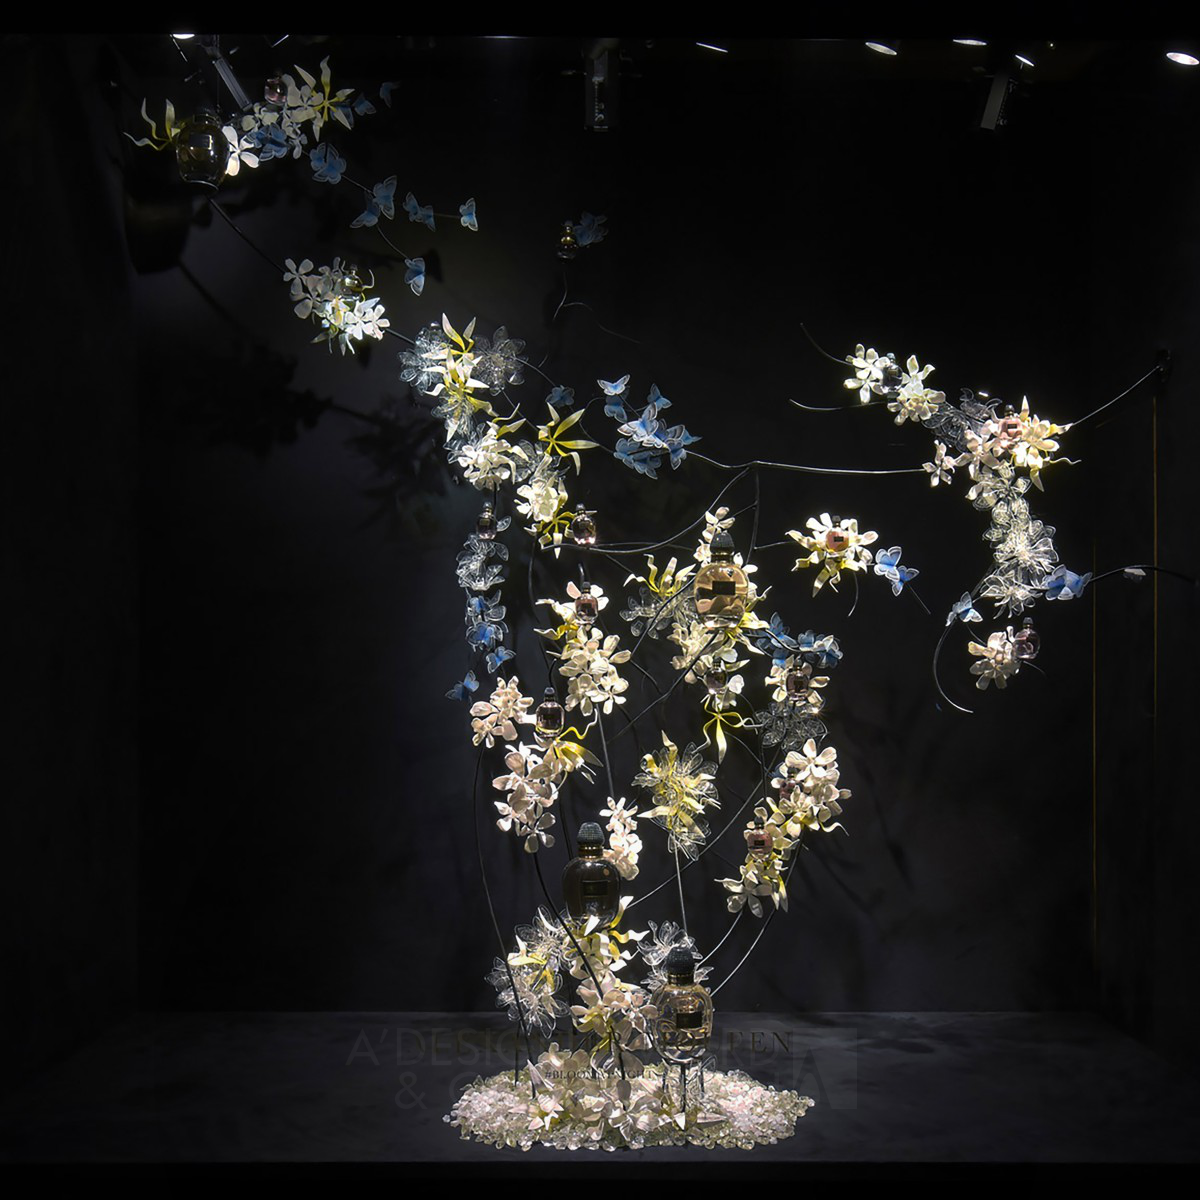 Bloom at night Visual Merchandising by L'Atelier Five